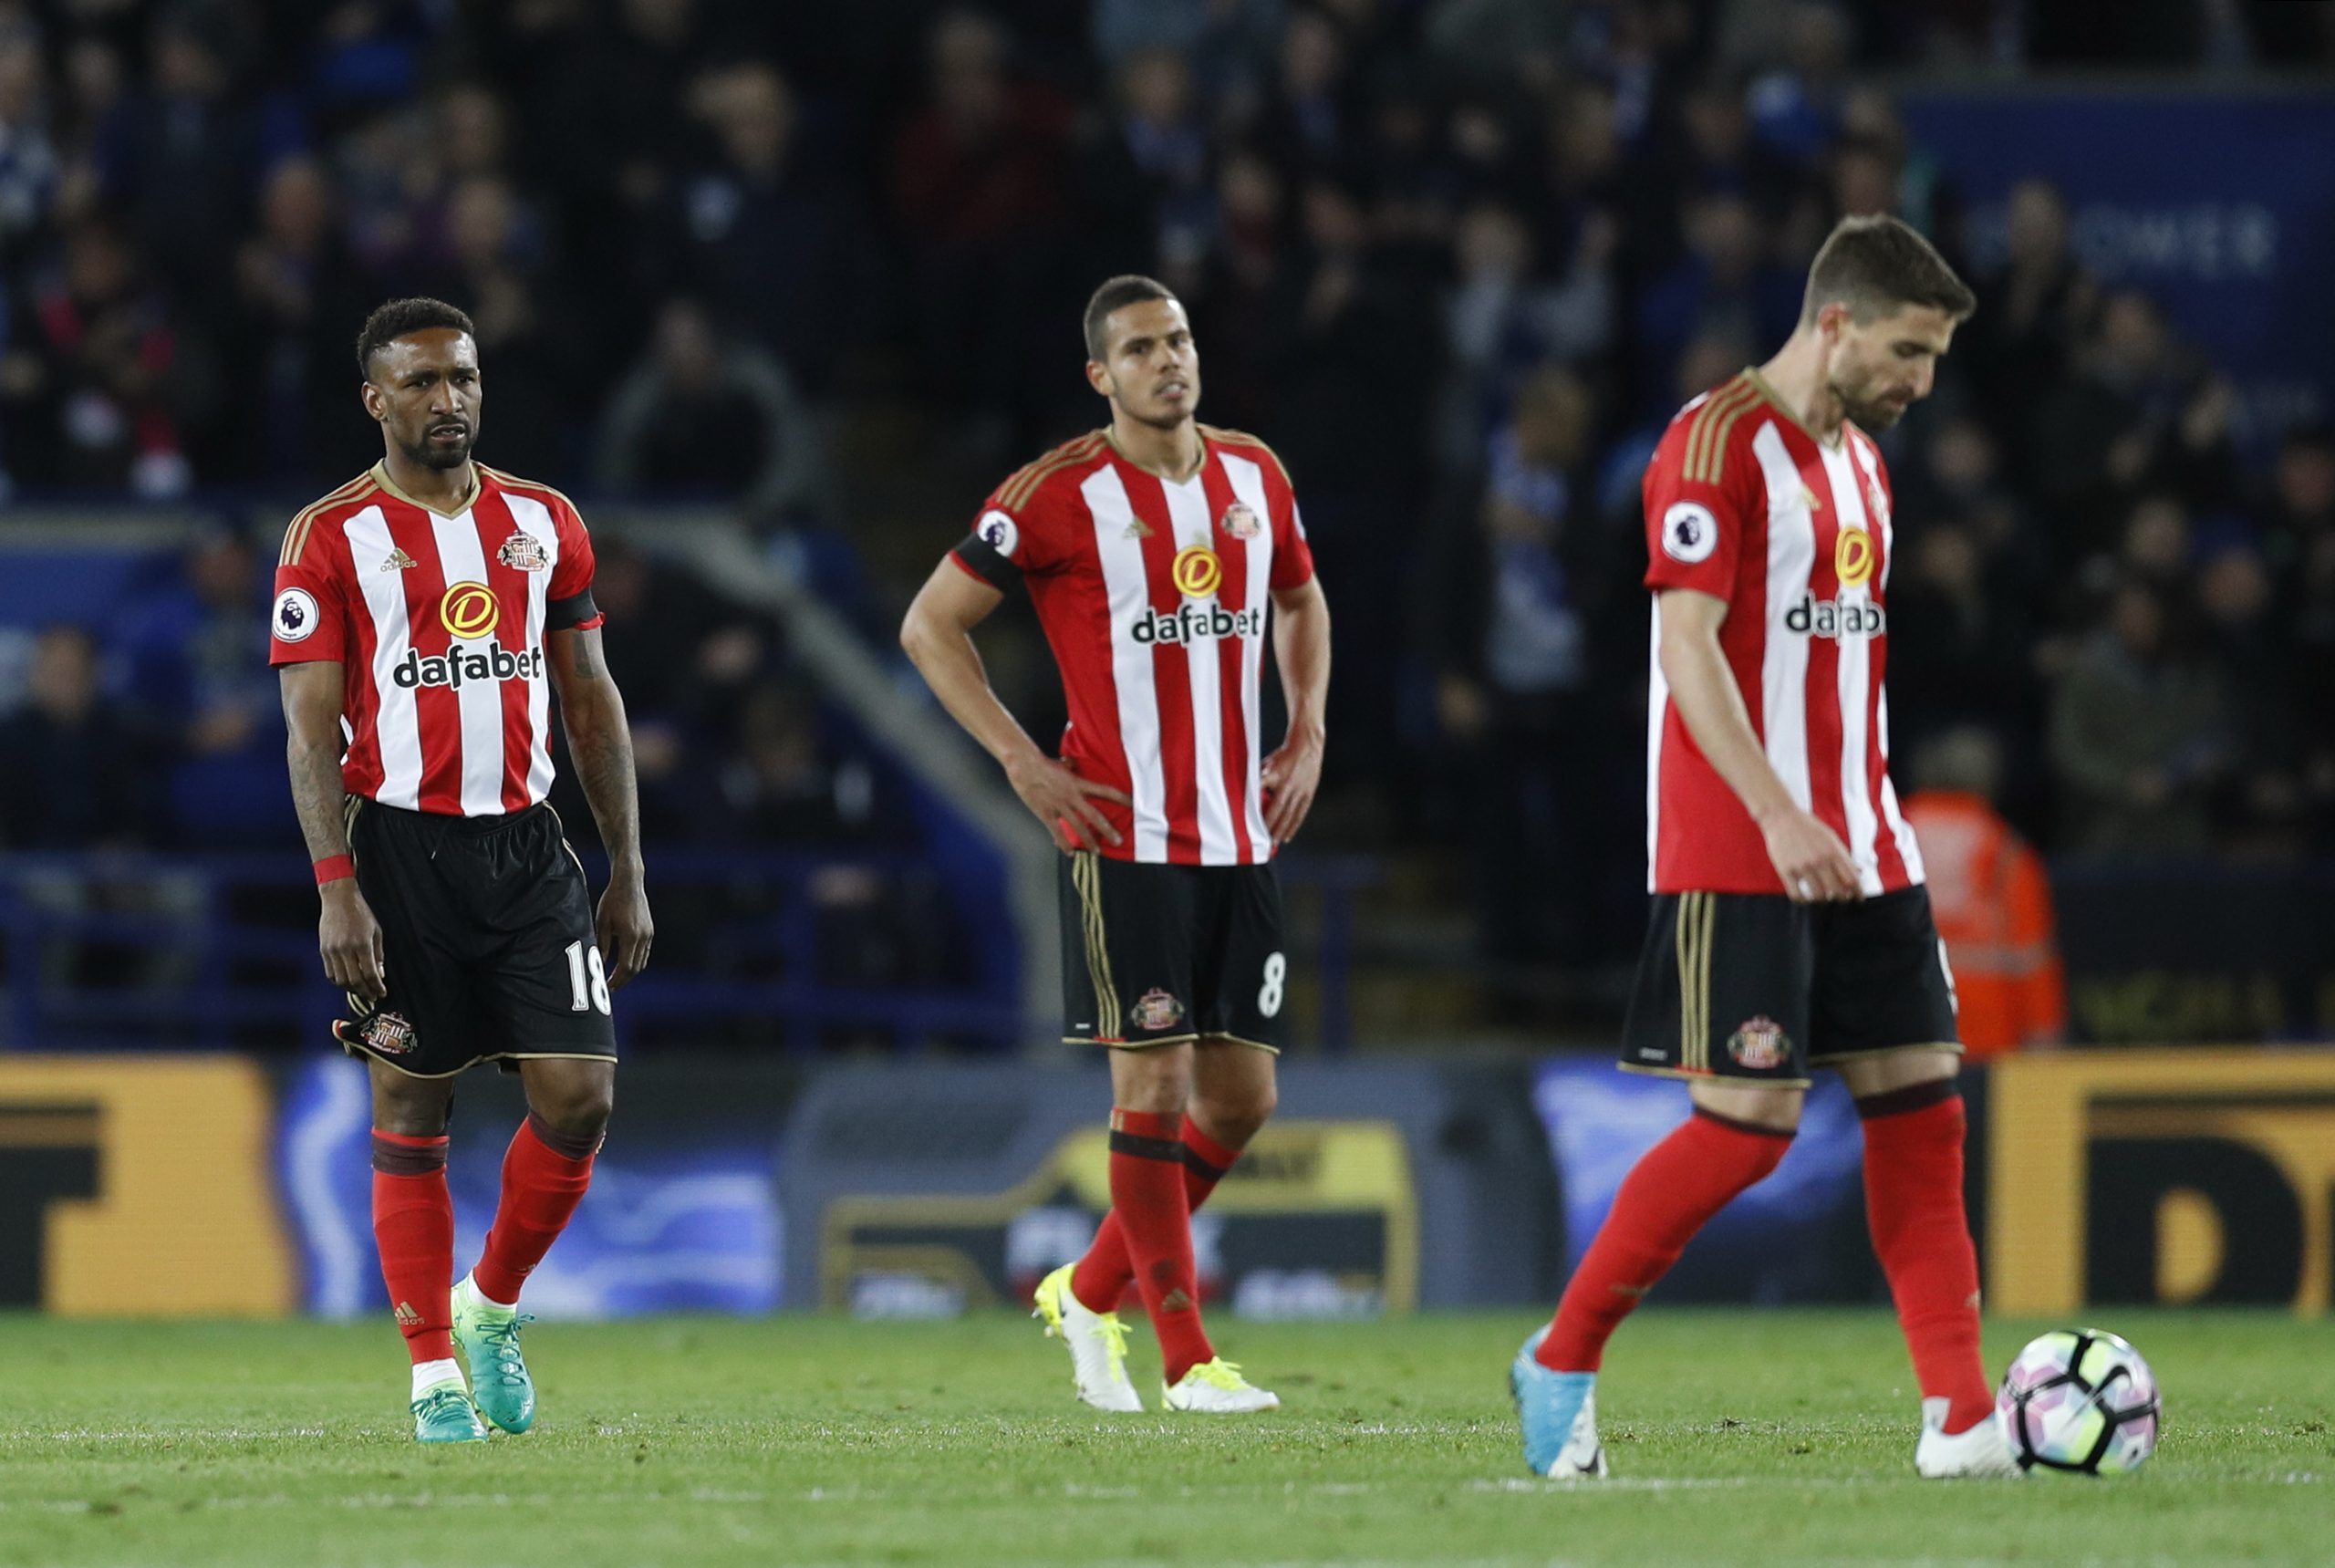 Britain Football Soccer - Leicester City v Sunderland - Premier League - King Power Stadium - 4/4/17 Sunderland's Jermain Defoe and Jack Rodwell look dejected after Leicester's Islam Slimani scored their first goal  Reuters / Darren Staples Livepic EDITORIAL USE ONLY. No use with unauthorized audio, video, data, fixture lists, club/league logos or 